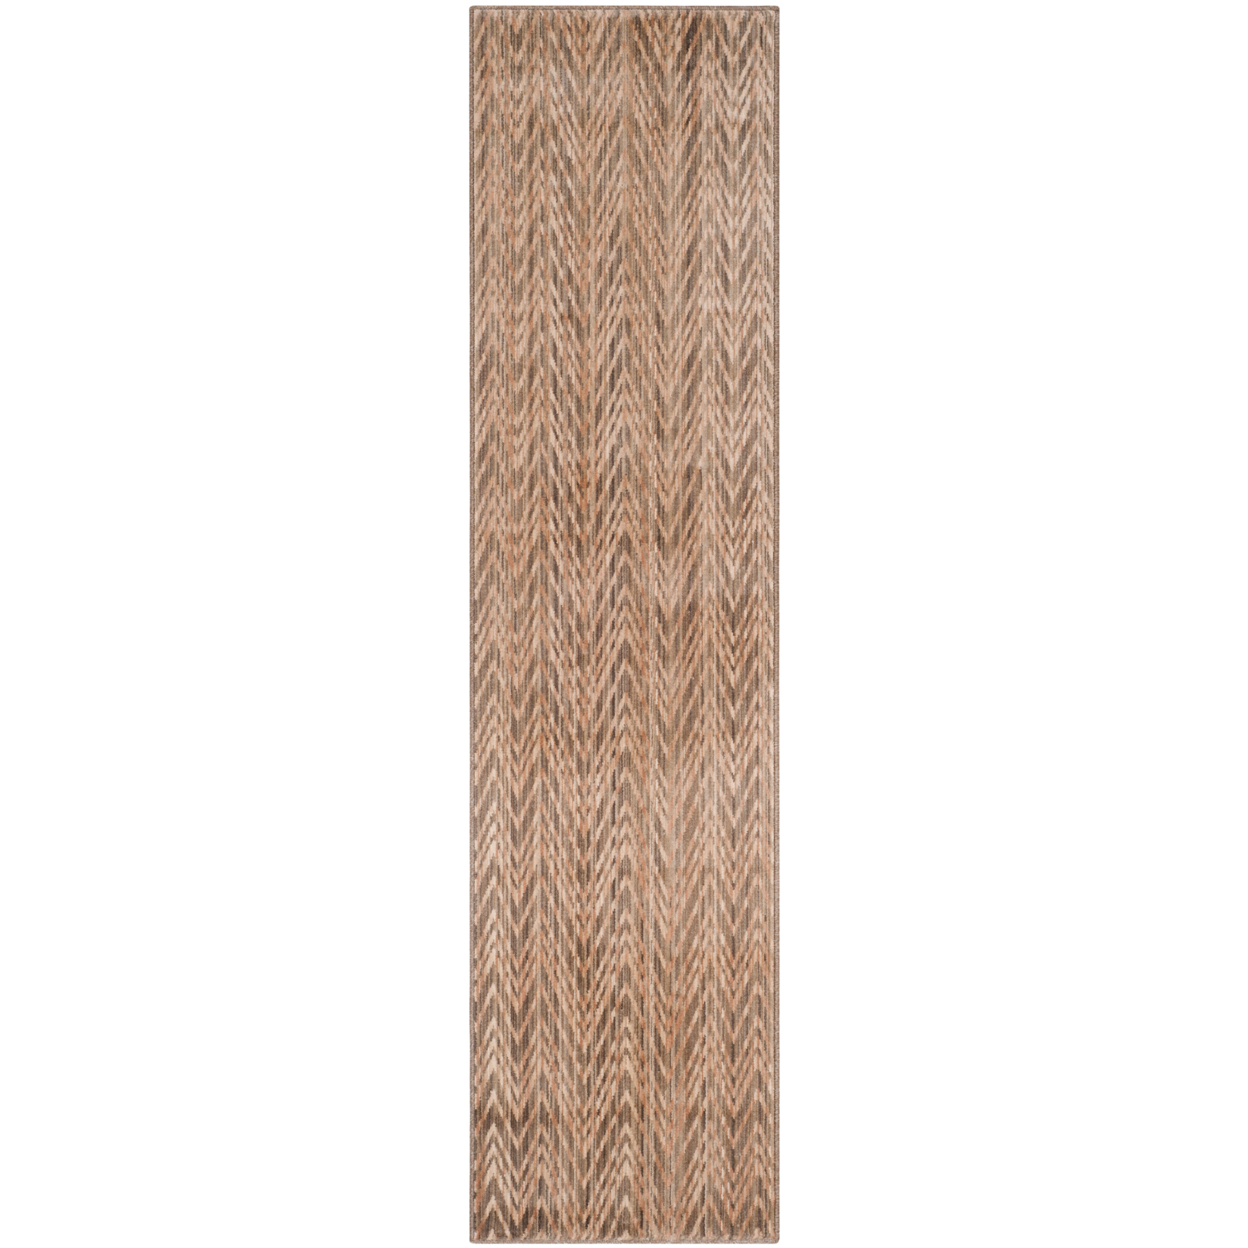 SAFAVIEH Infinity Collection INF588V Taupe / Beige Rug - 9' X 12'